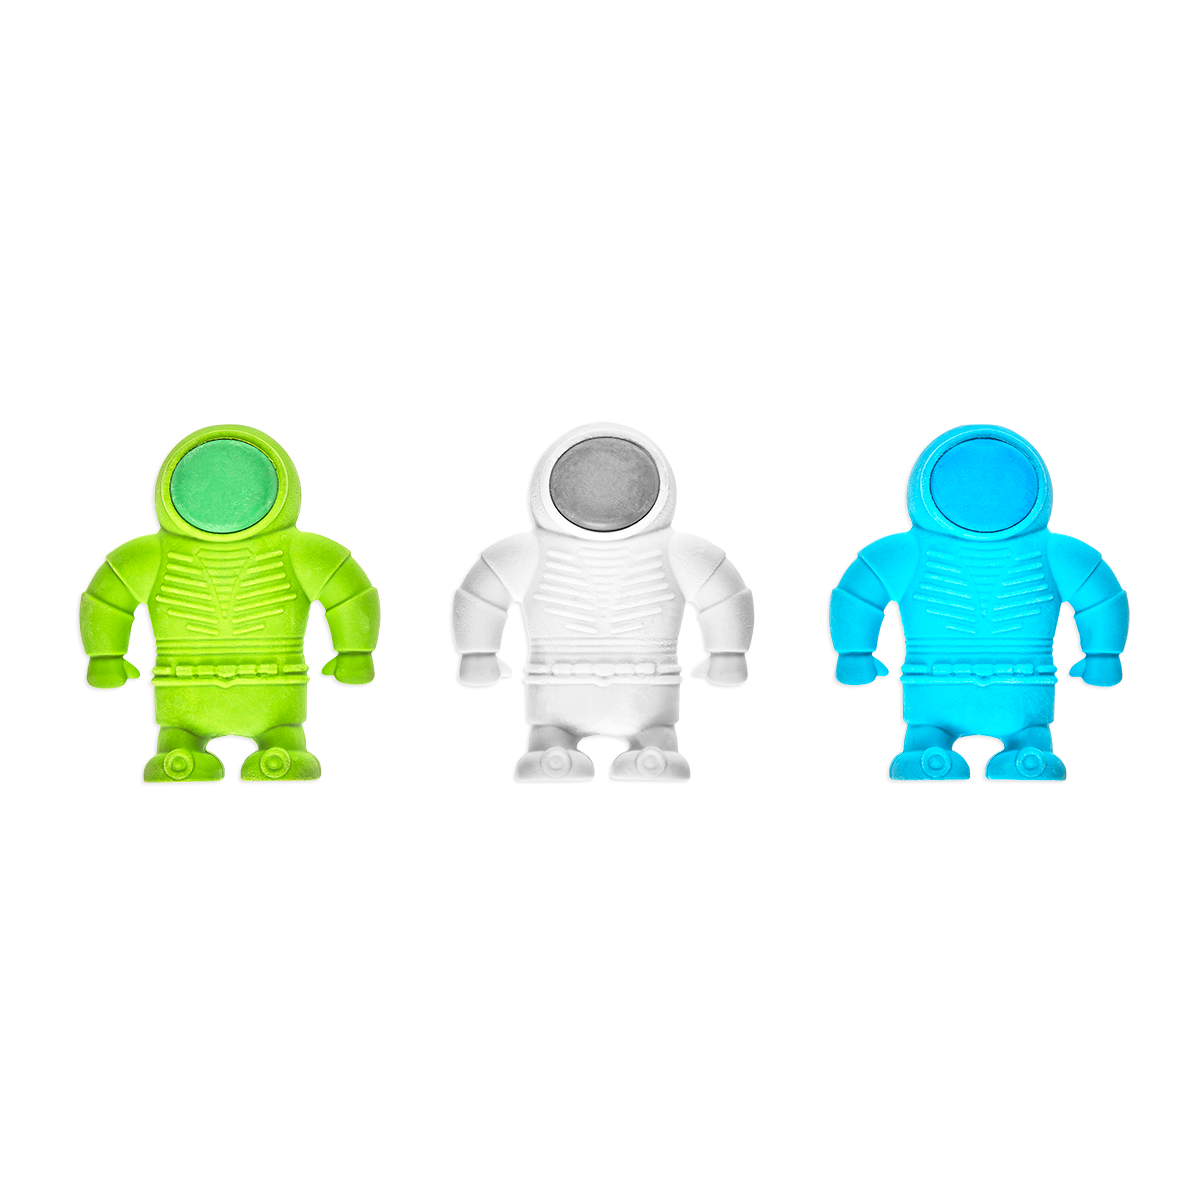 3 different colors of Astronaut Erasers shown standing together